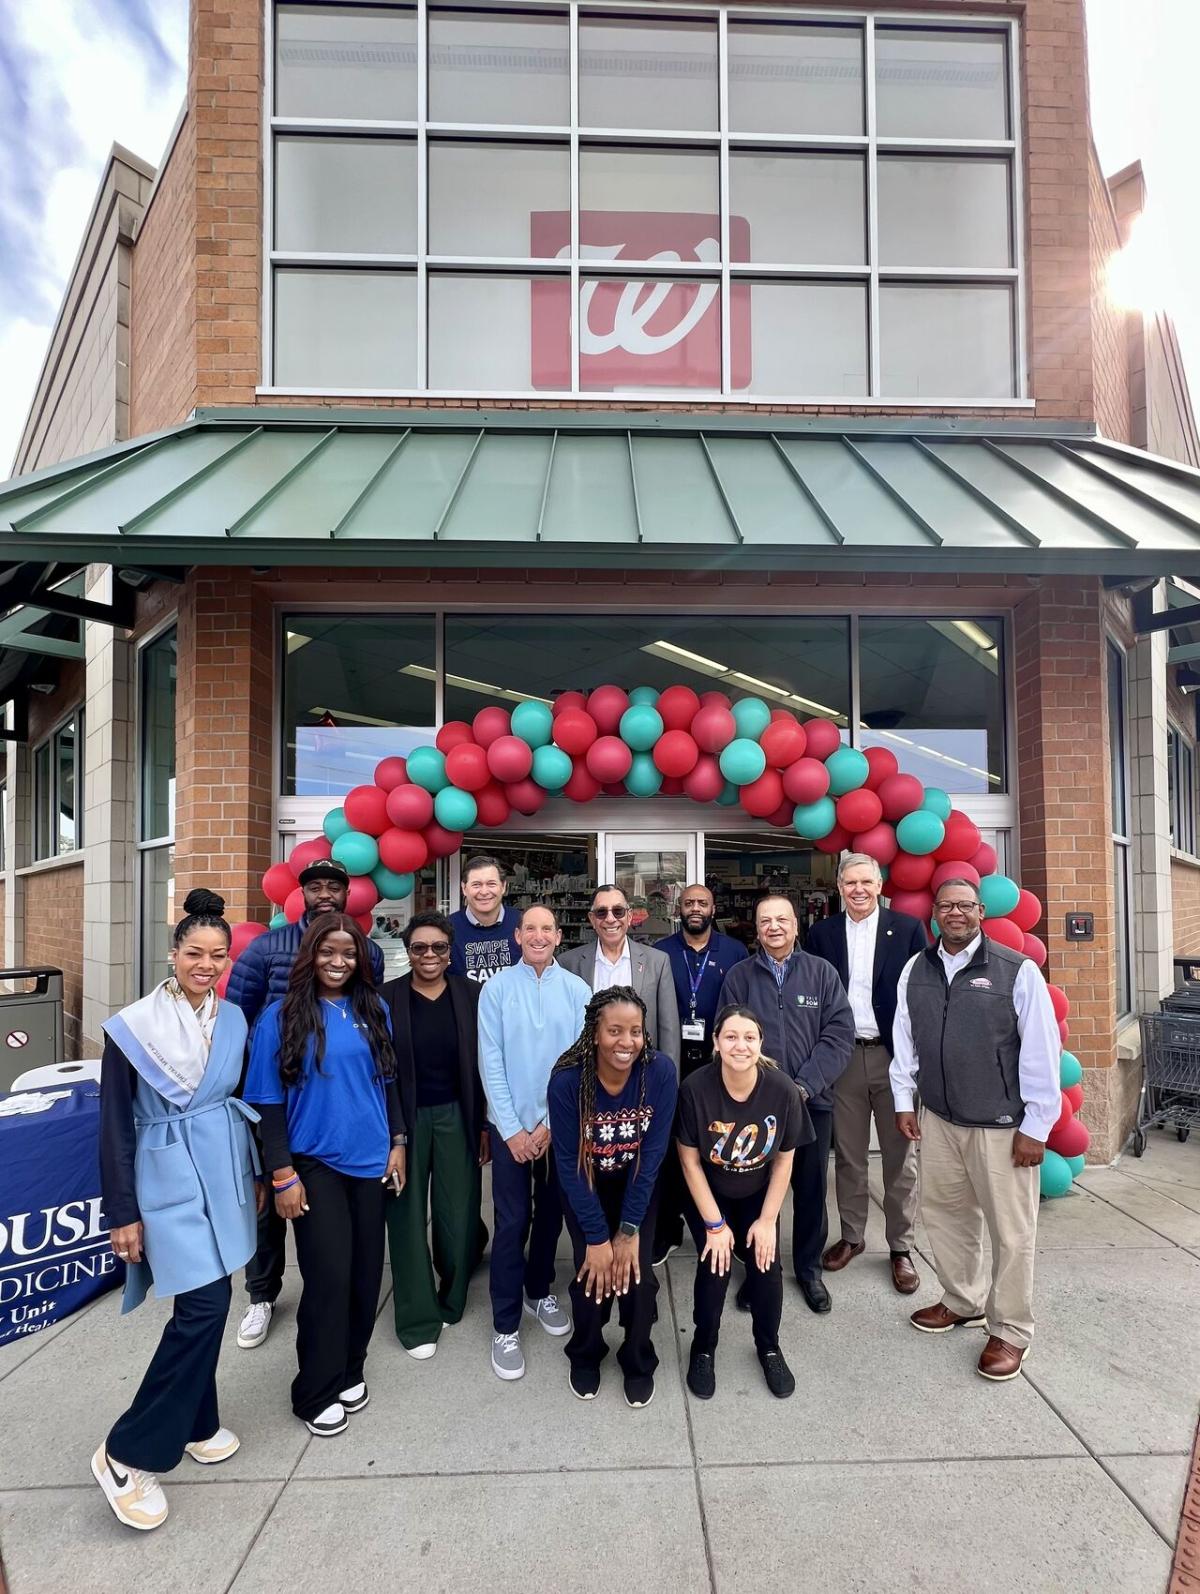 A group of people posed outside a Walgreens. A balloon arch over the entrance.